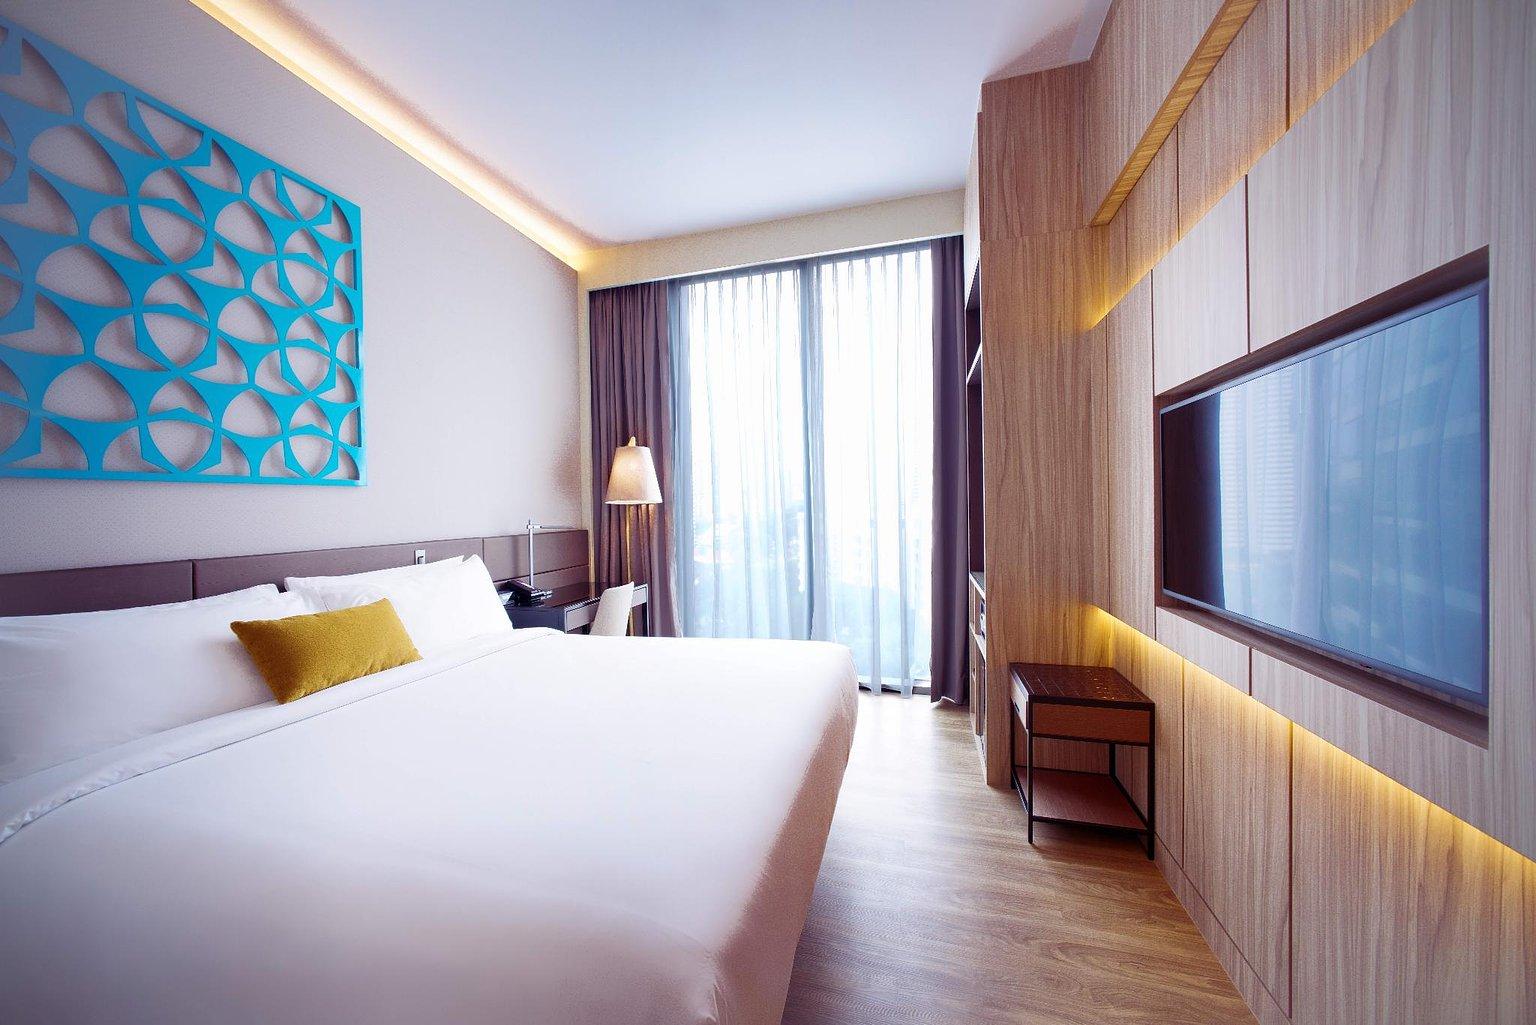 Deluxe Room with 1 double bed - 머큐어 싱가포르 온 스티븐스 / Mercure Singapore On Stevens